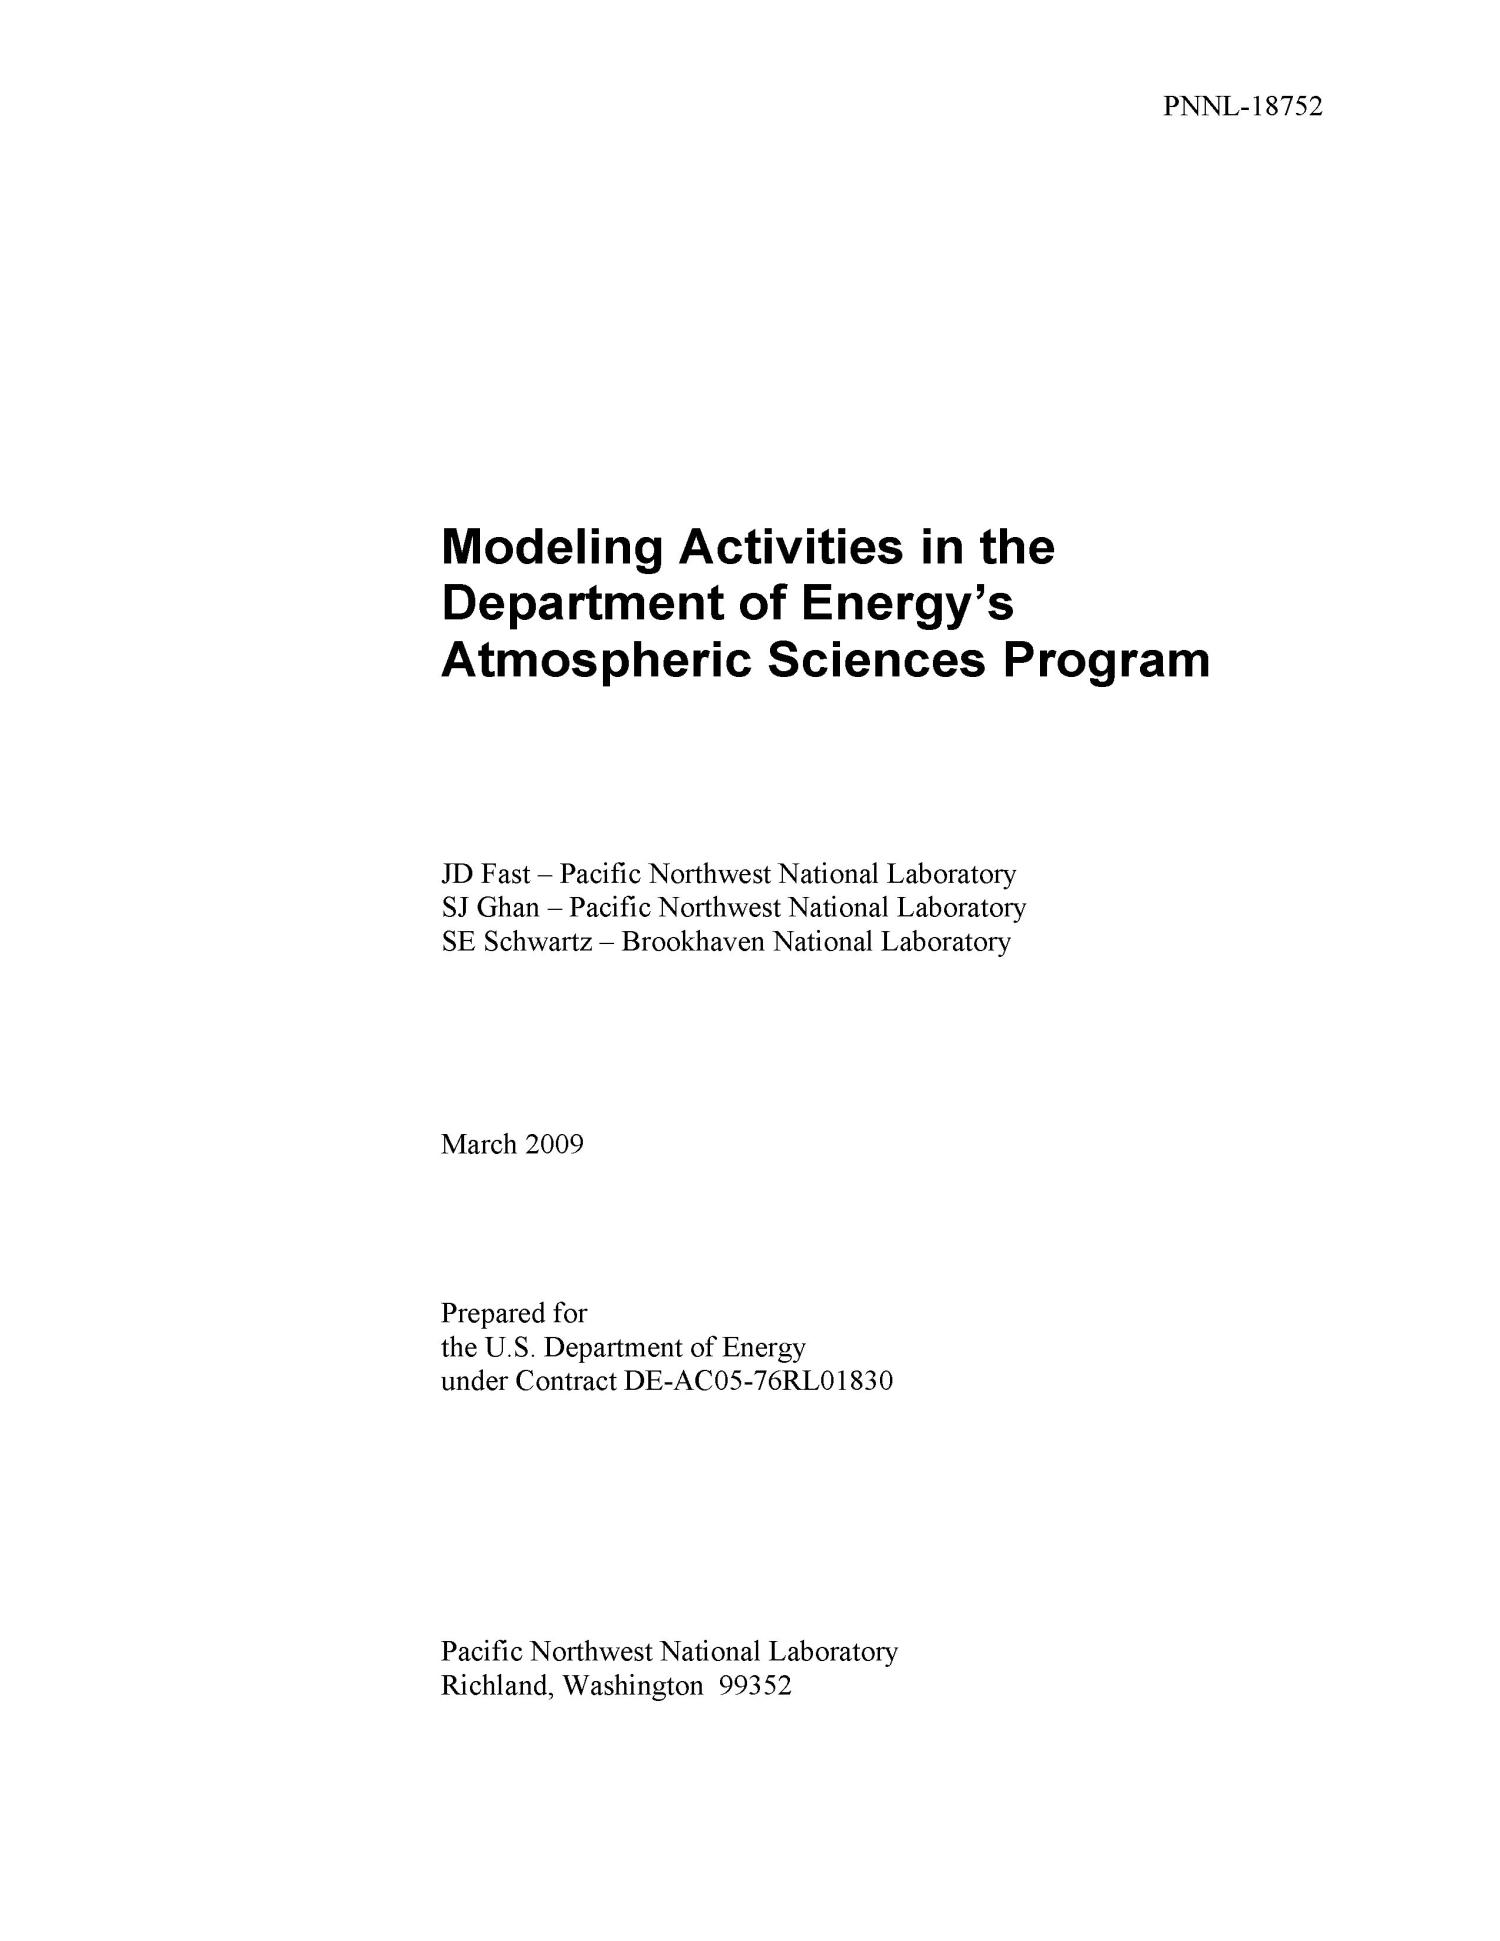 Modeling Activities in the Department of Energy’s Atmospheric Sciences Program
                                                
                                                    [Sequence #]: 3 of 40
                                                